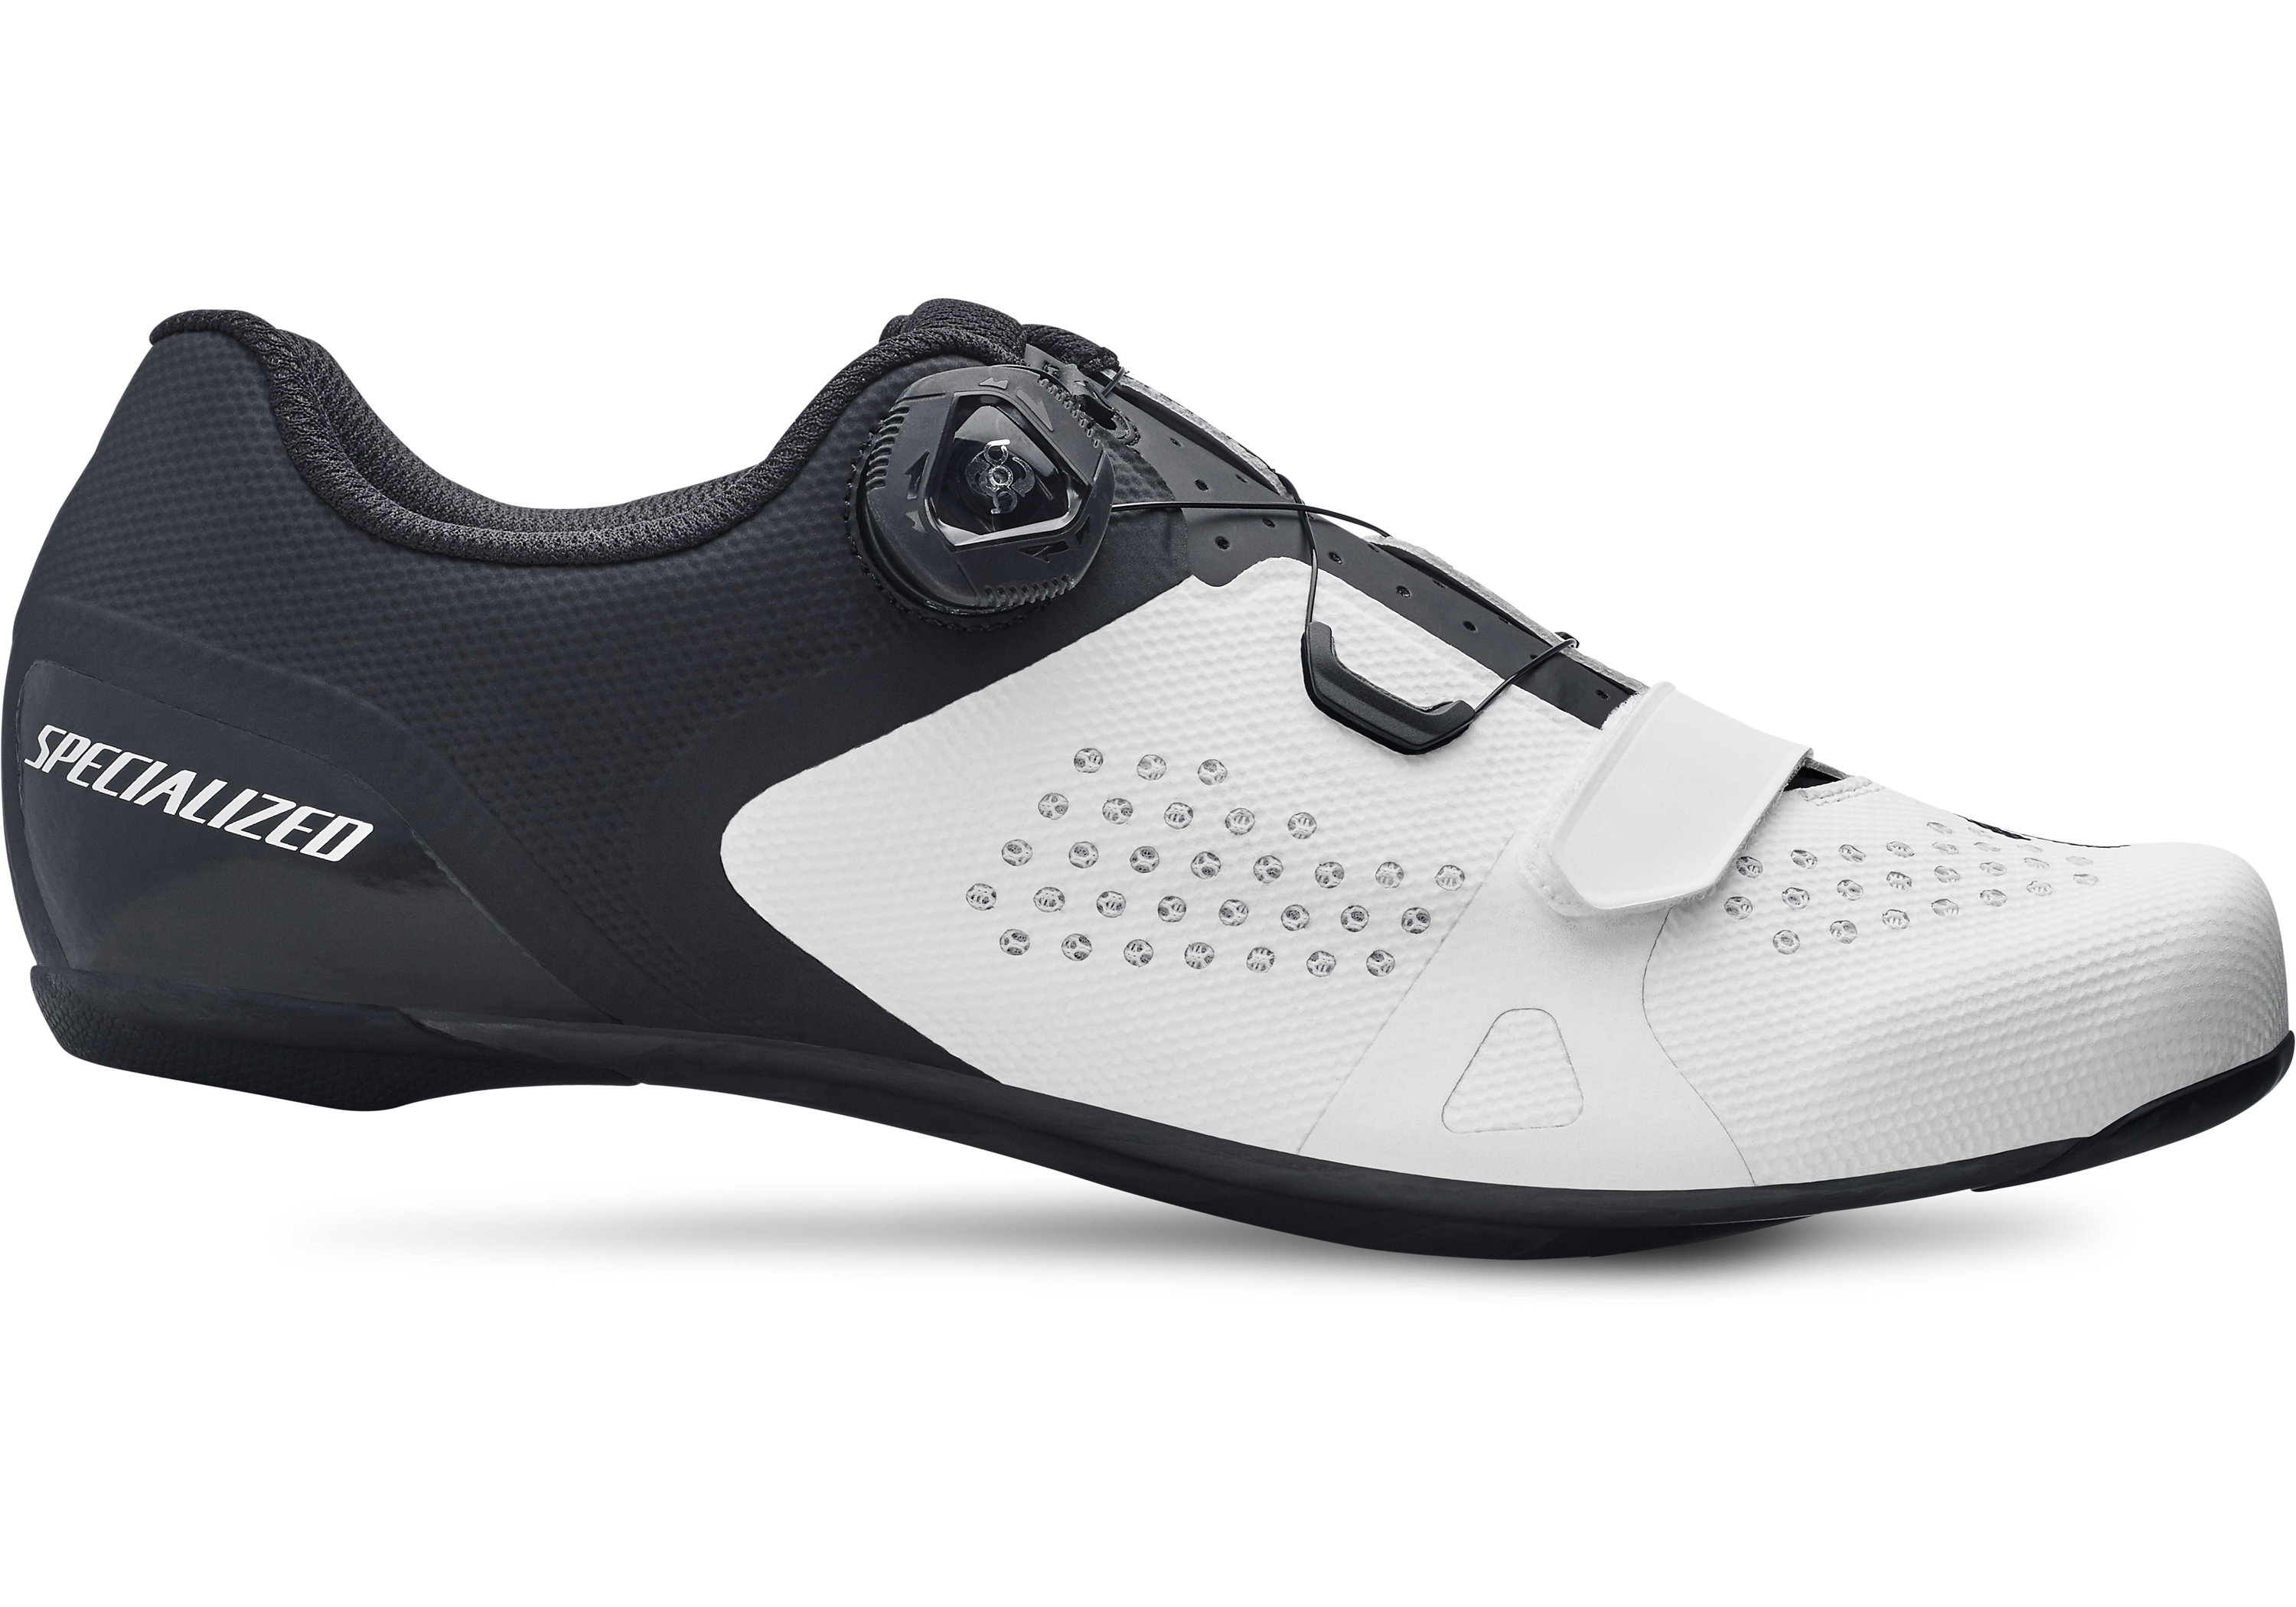 Велообувь Specialized TORCH 2.0 RD SHOE WHT 43.5 2020 61018-34435